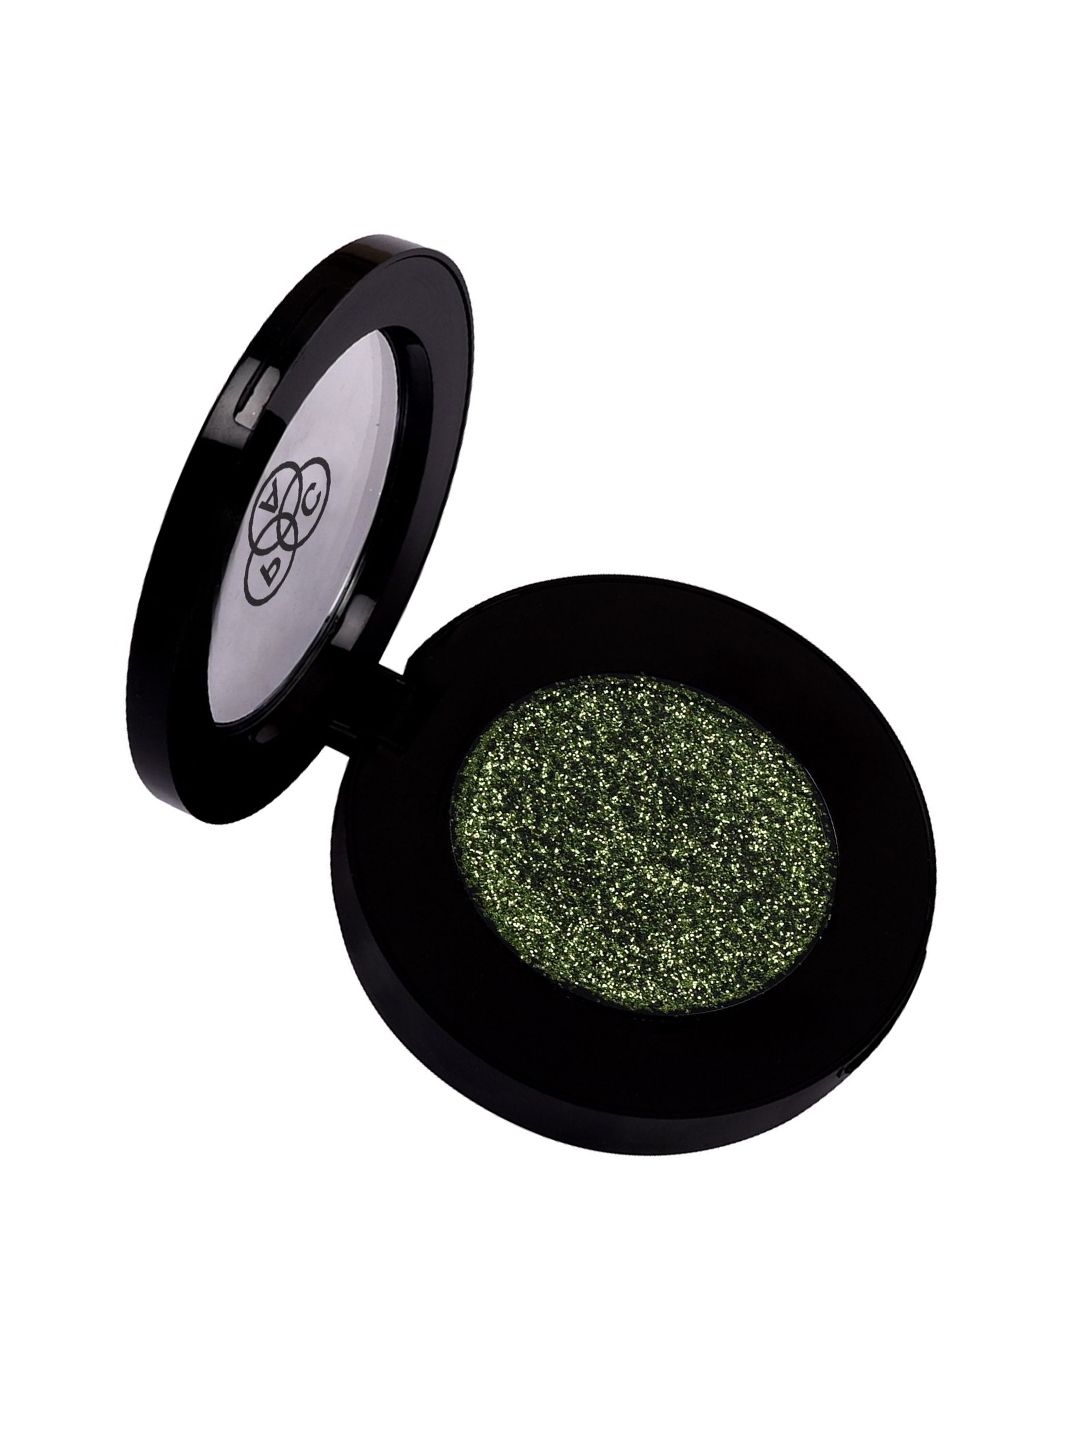 PAC 26 Green Moss Pressed Glitter Eyeshadow 3 g Price in India